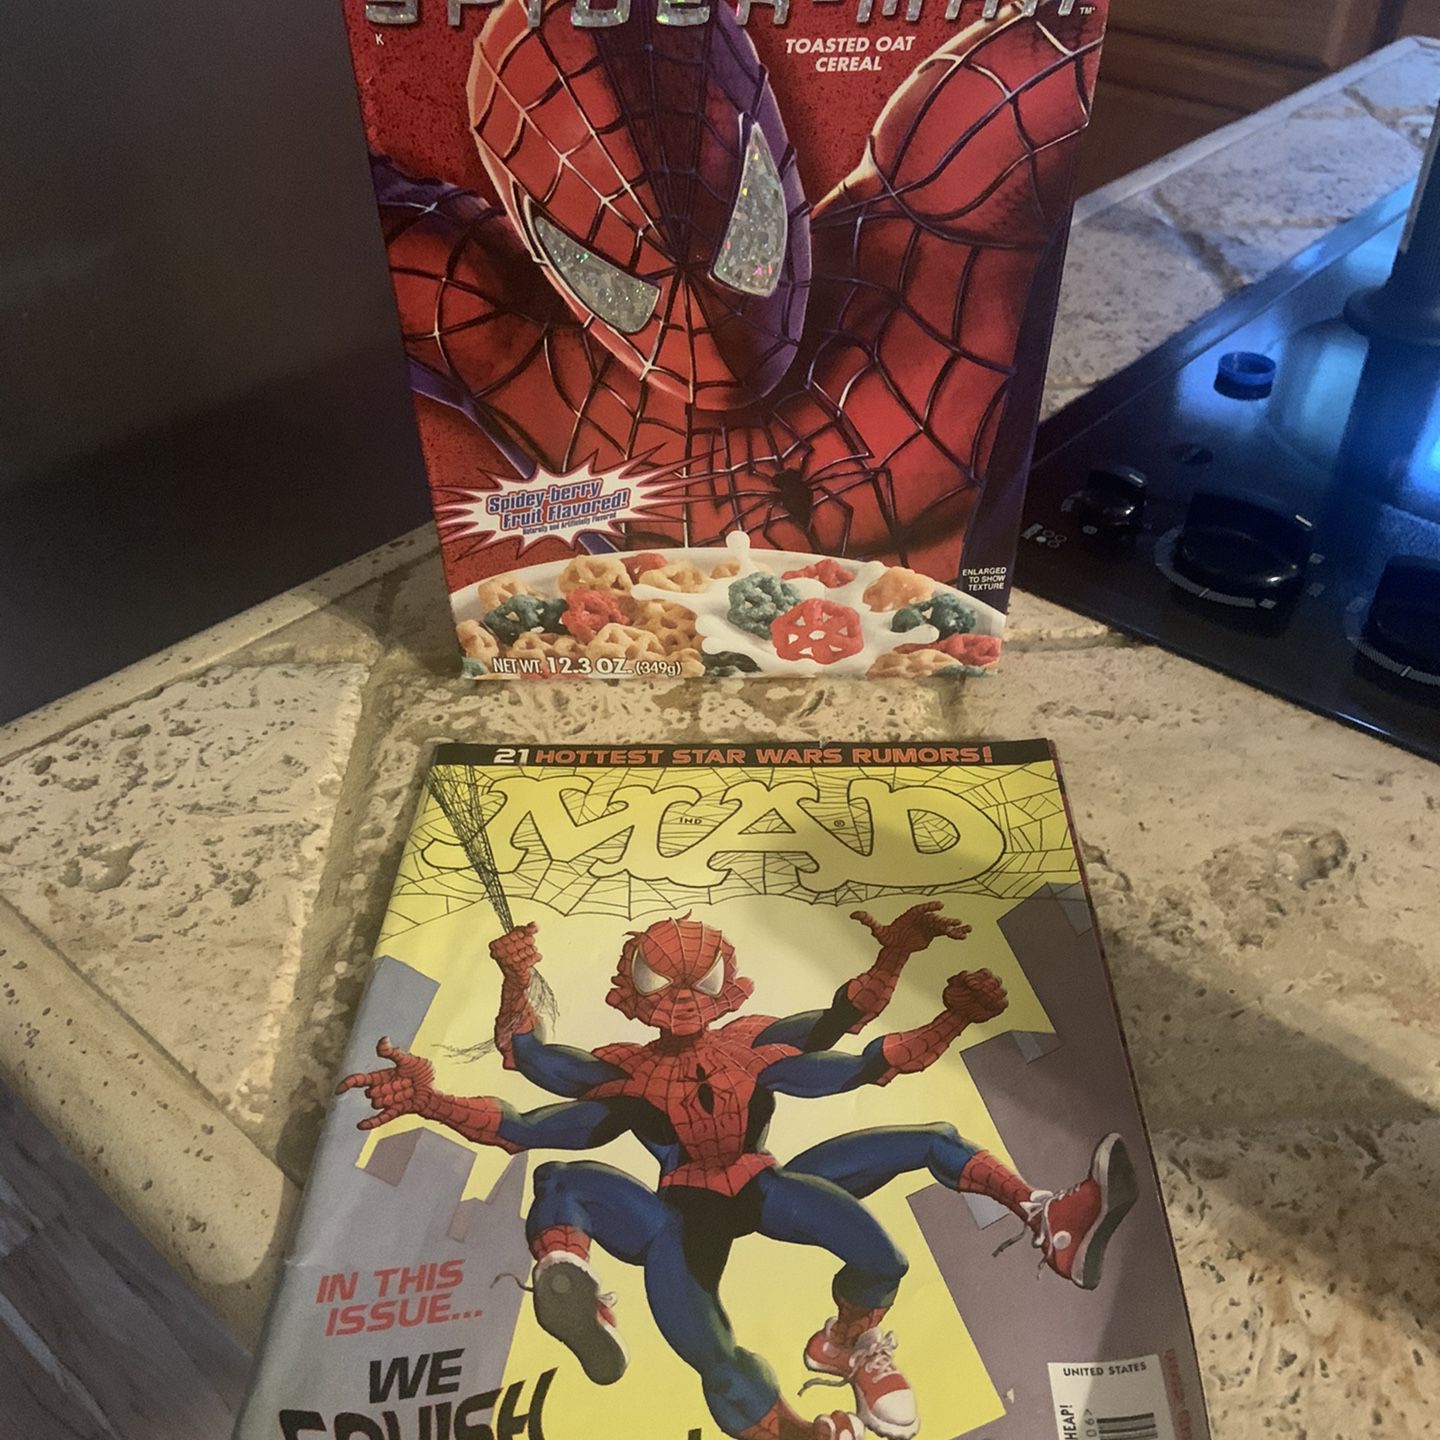 Spiderman cereal and mad magazine combo